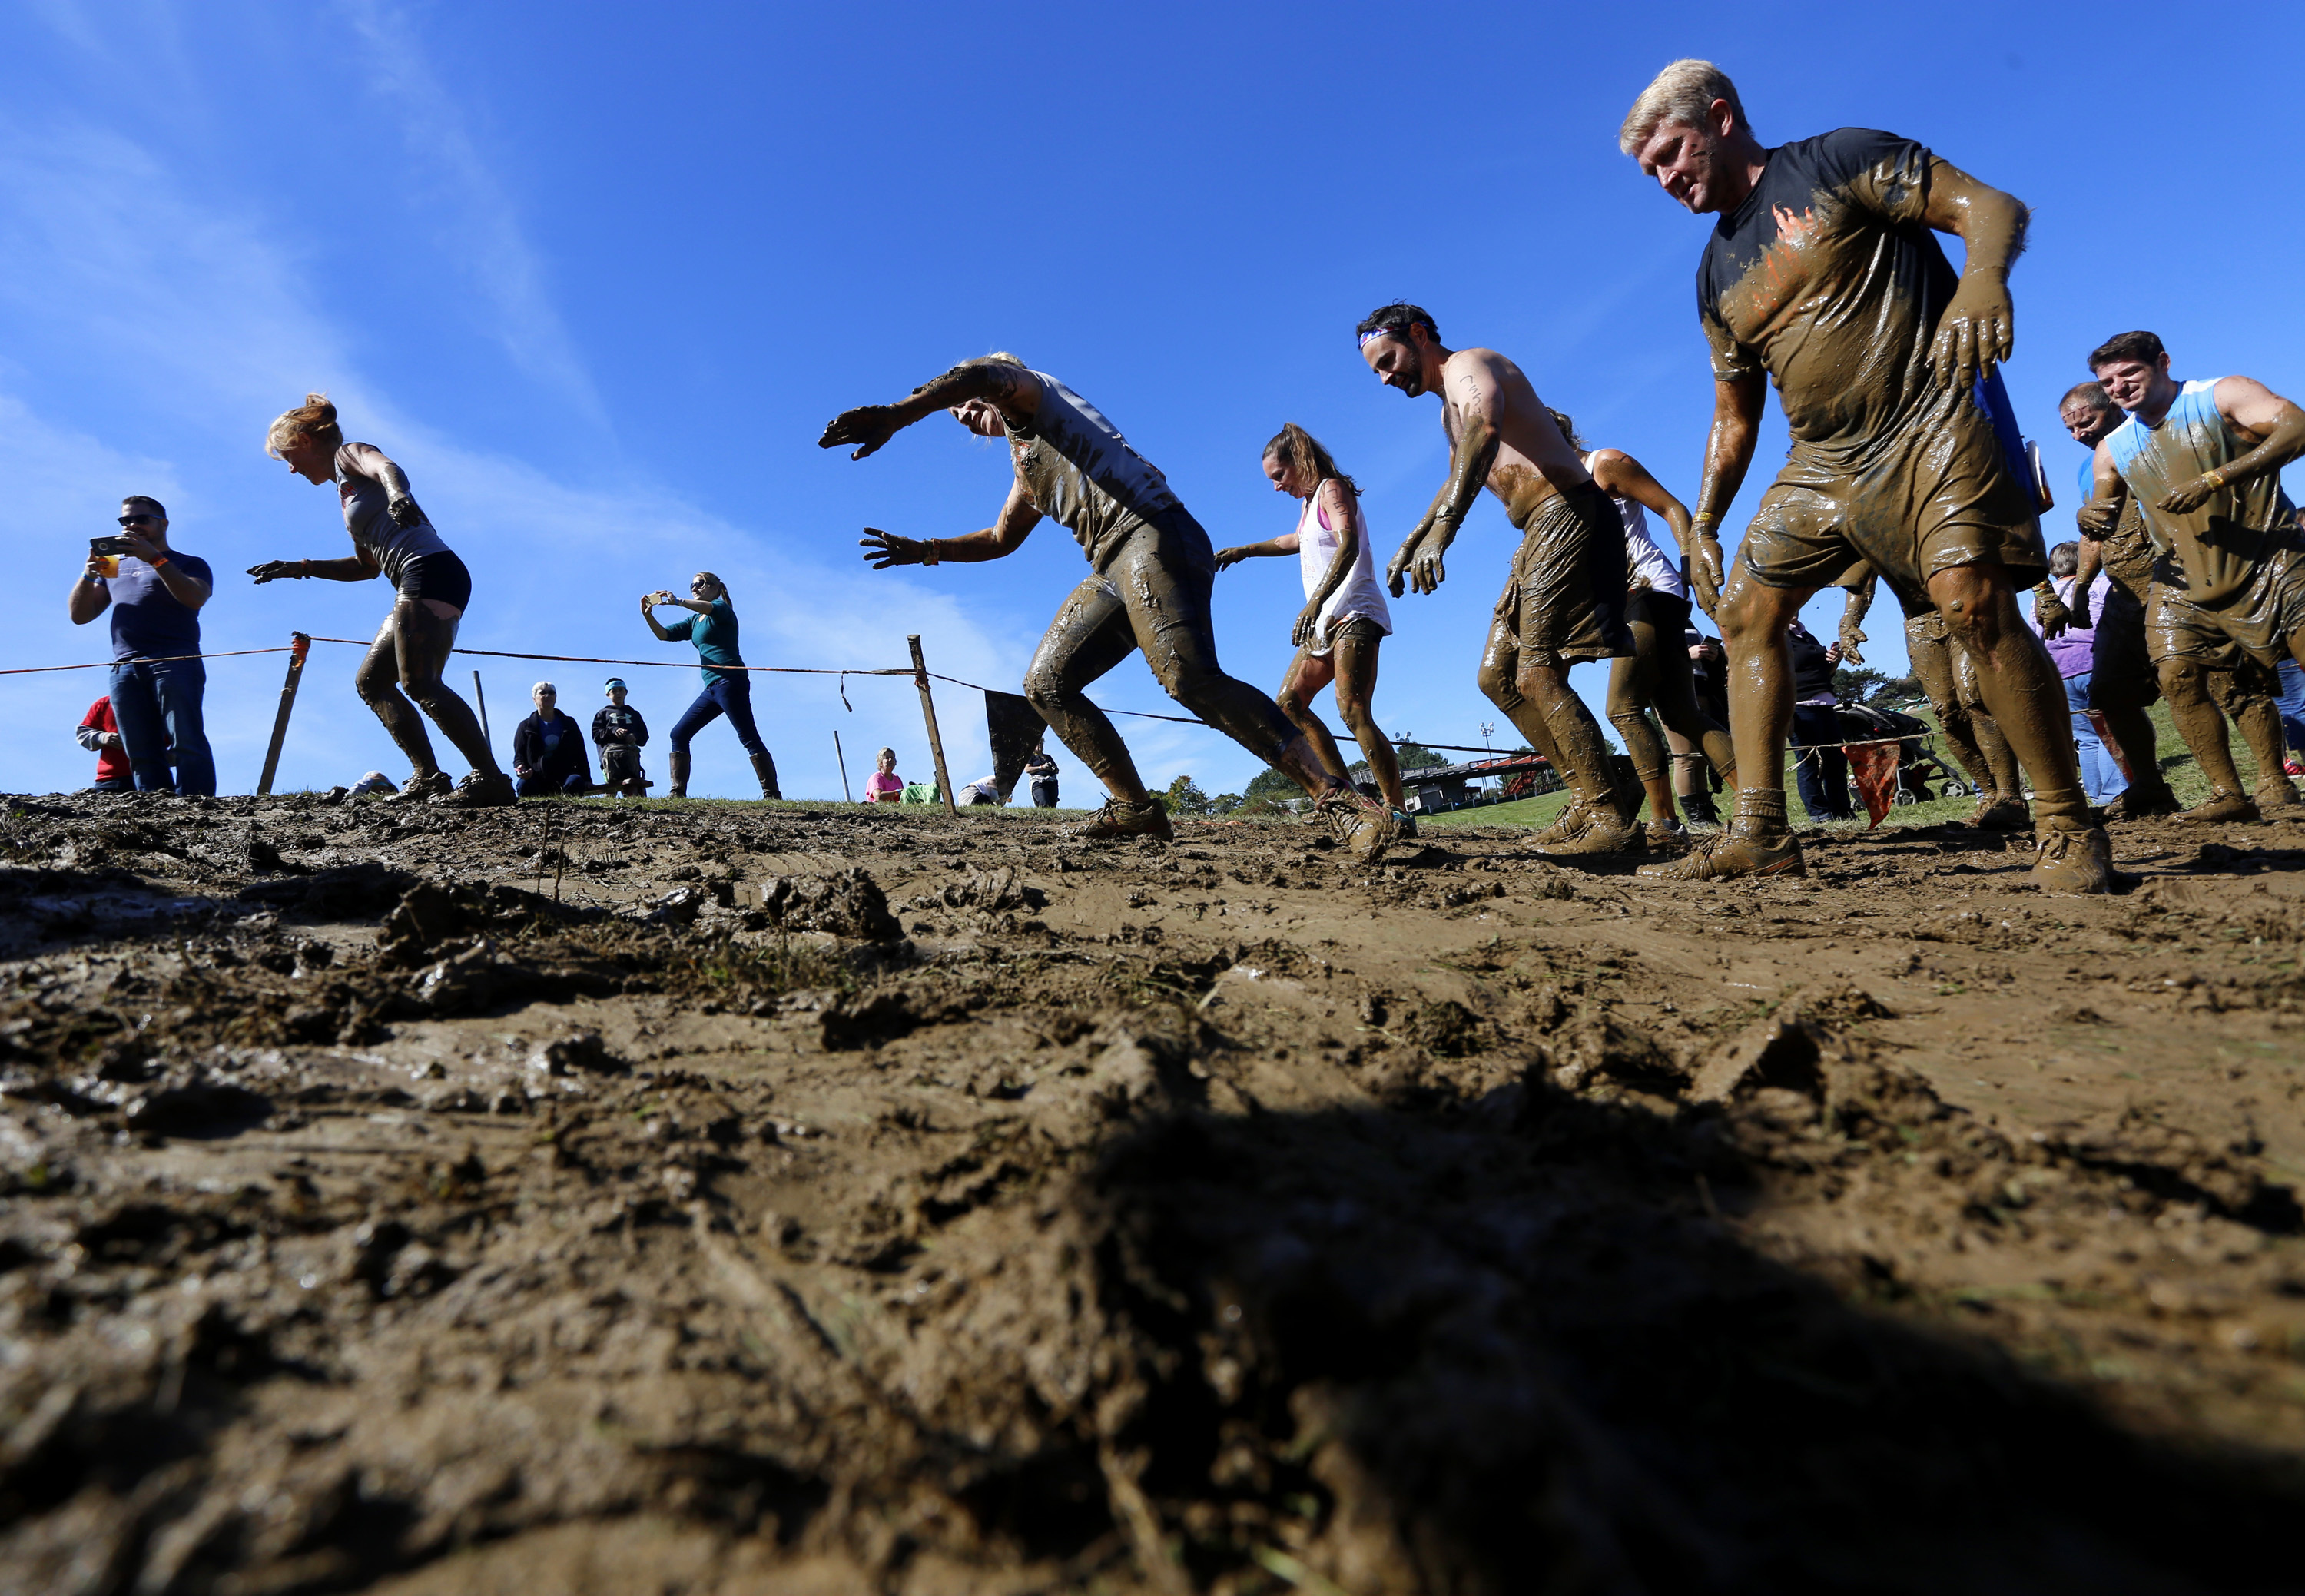 Participants climb a muddy hill after crawling through the "Kiss of Mud 2.0" obstacle during the Tough Mudder obstacle course on Sept. 26, 2015. (Derek Davis—Portland Press Herald/Getty Images)